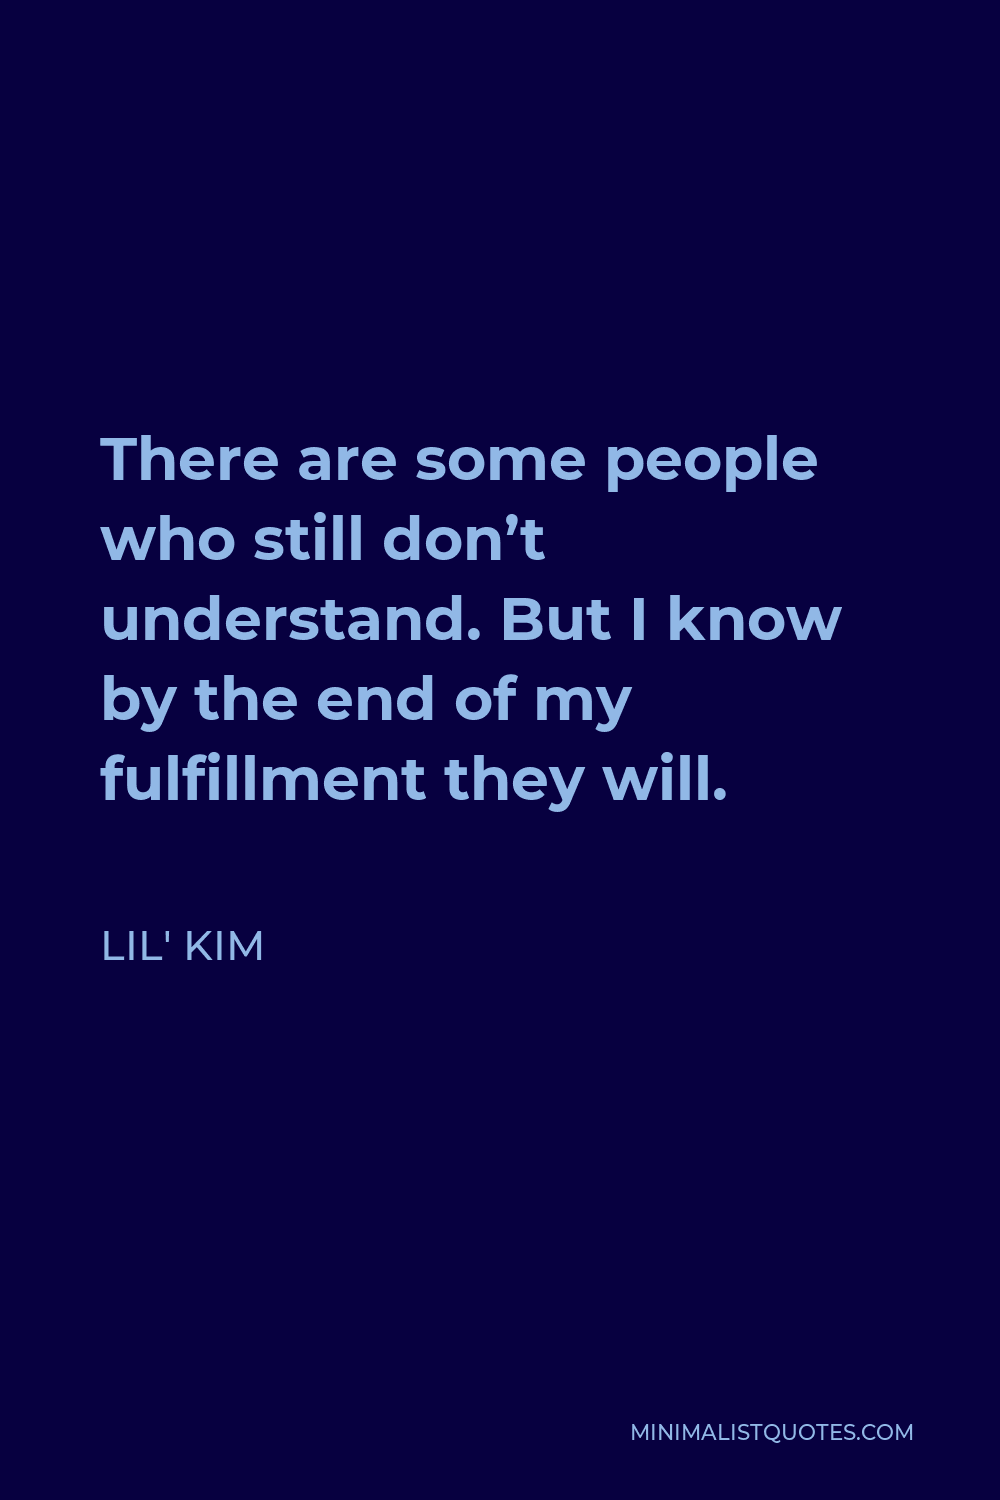 Lil' Kim Quote - There are some people who still don’t understand. But I know by the end of my fulfillment they will.